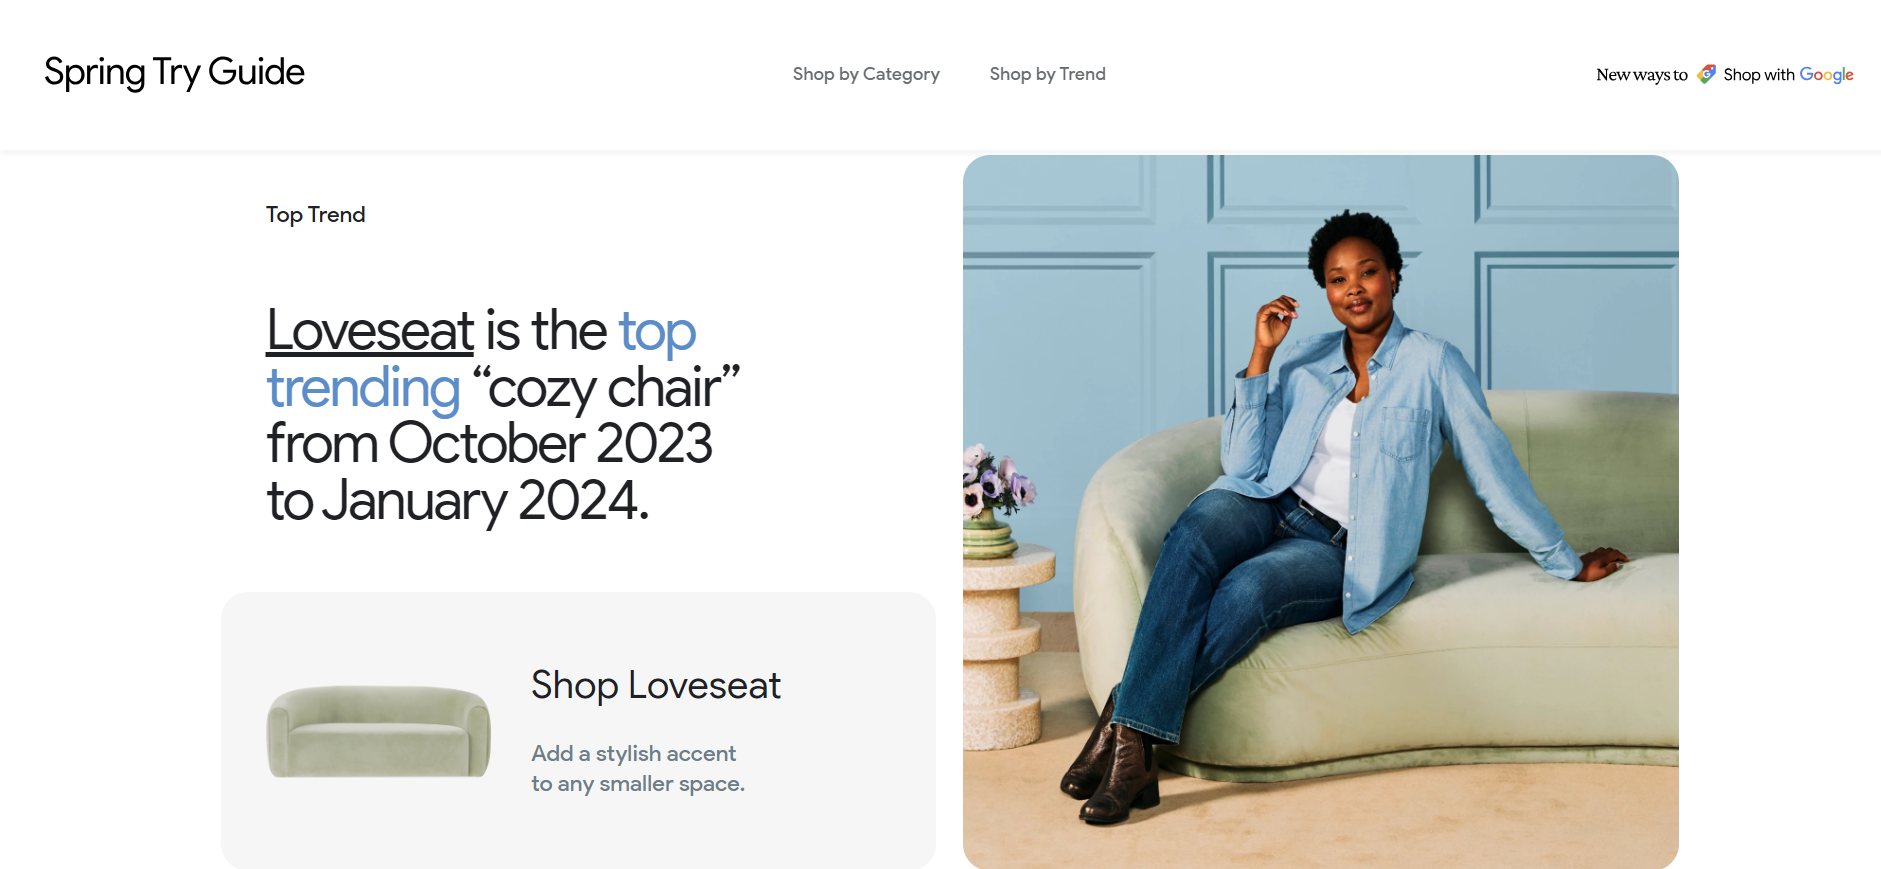 Loveseat Shop with Google